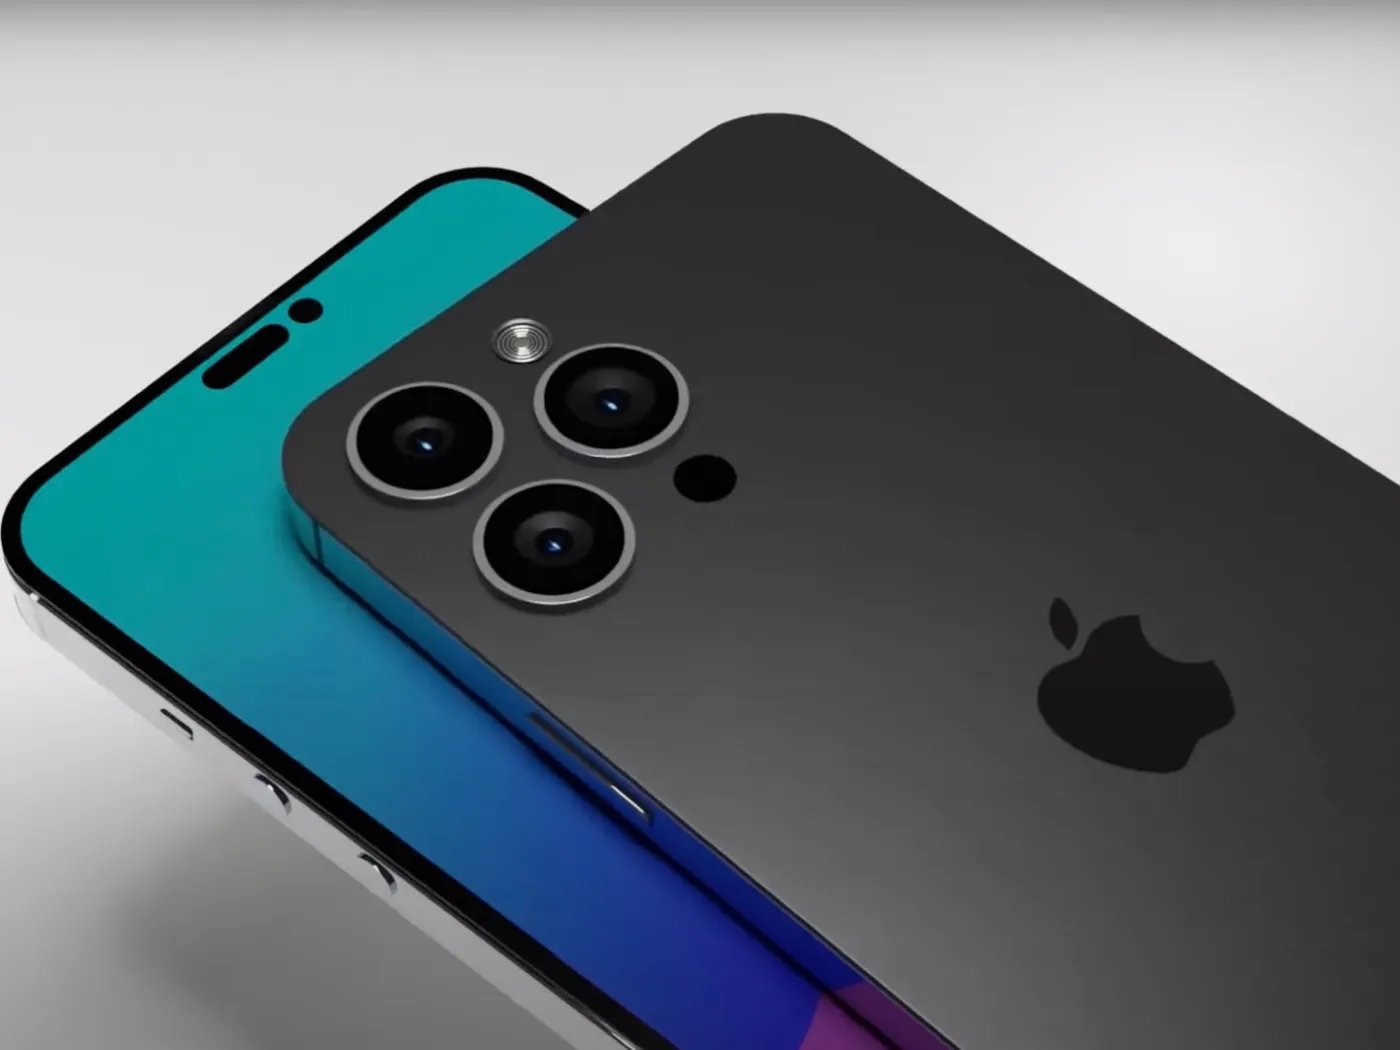 leaked-iphone-14-pro-renders-show-off-hole-pill-display-cutouts-check-it-out